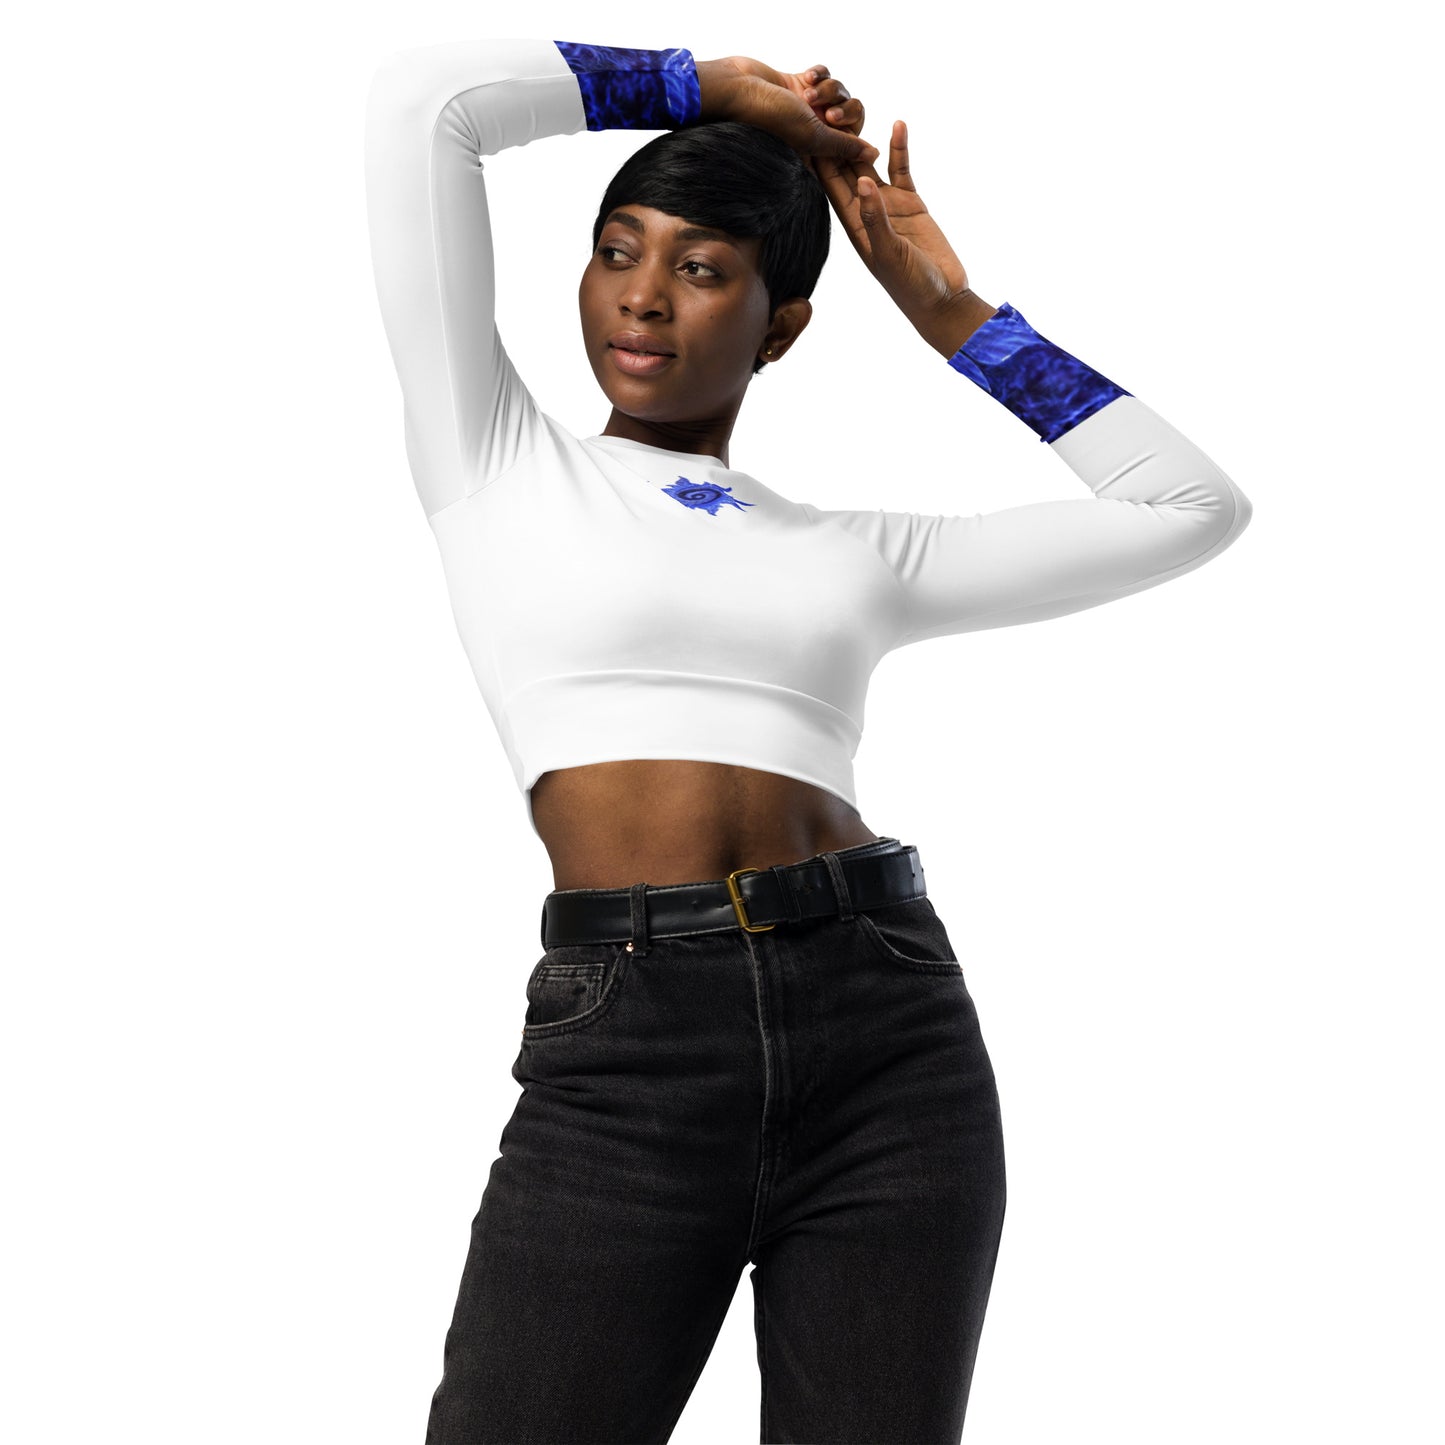 Recycled long-sleeve crop top ActSun3-White